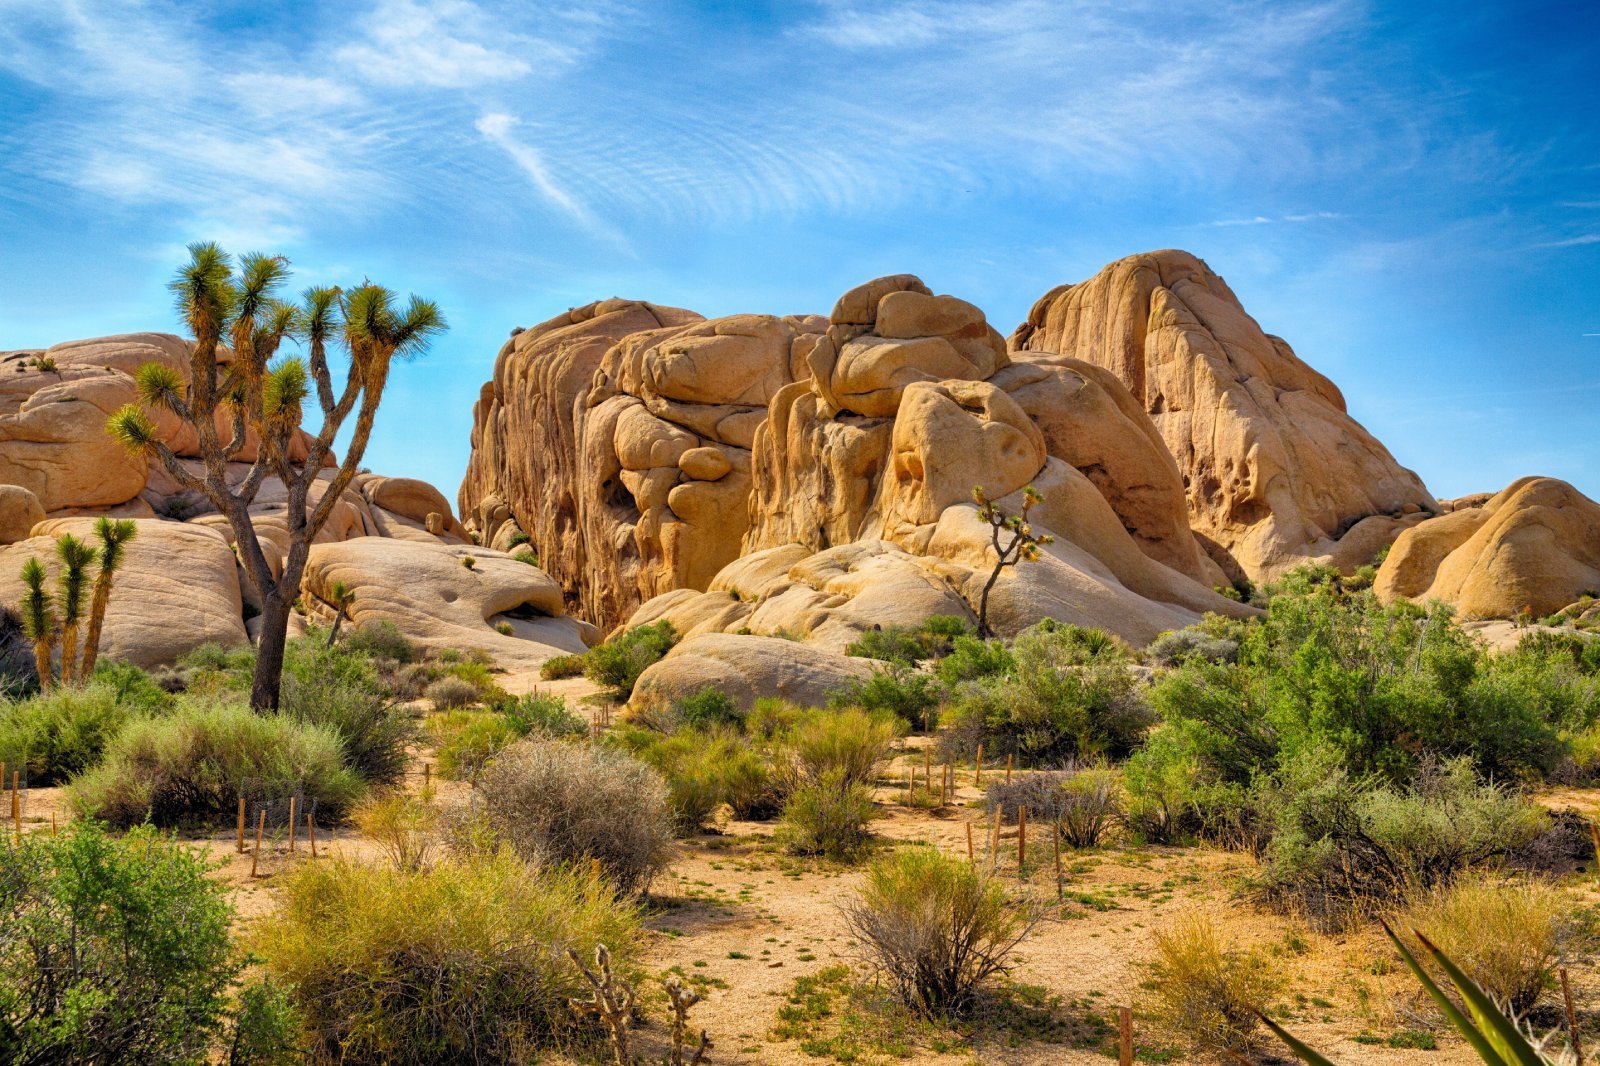 Image Credit: Shutterstock / Gary C. Tognoni <p>Paul Miller, an experienced hiker, went missing in Joshua Tree National Park, California, in July 2019. His remains were discovered months later, indicating he likely succumbed to extreme heat and dehydration. Miller’s disappearance highlighted the harsh conditions of desert hiking.</p>